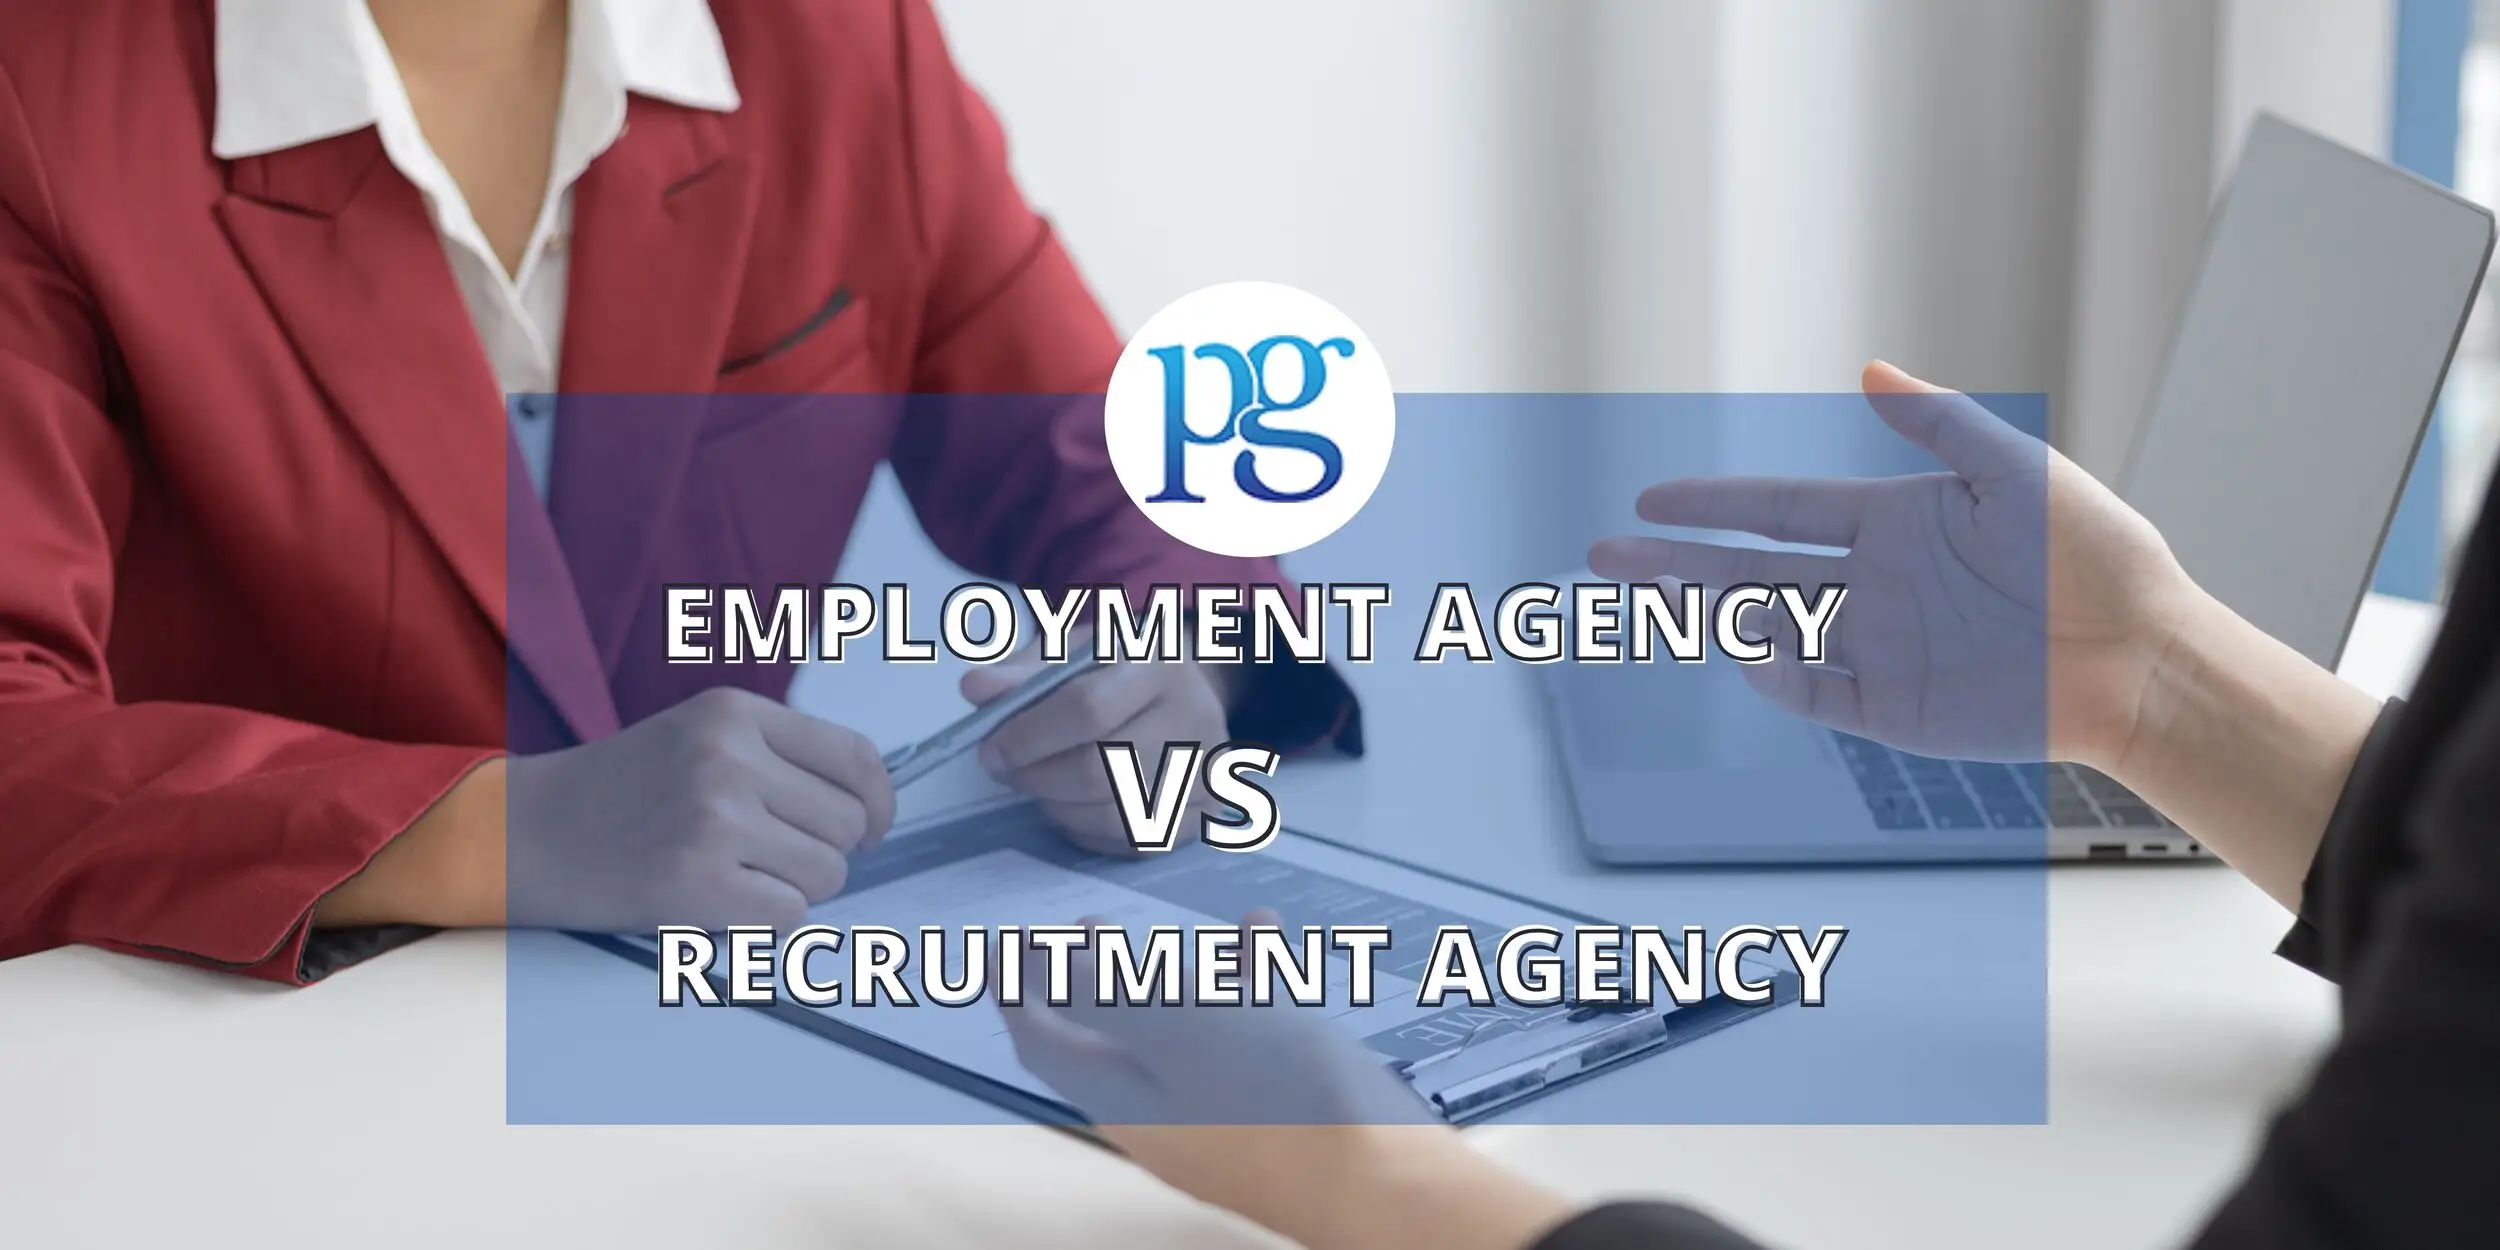 DIFFERENCE BETWEEN EMPLOYMENT & RECRUITMENT AGENCY